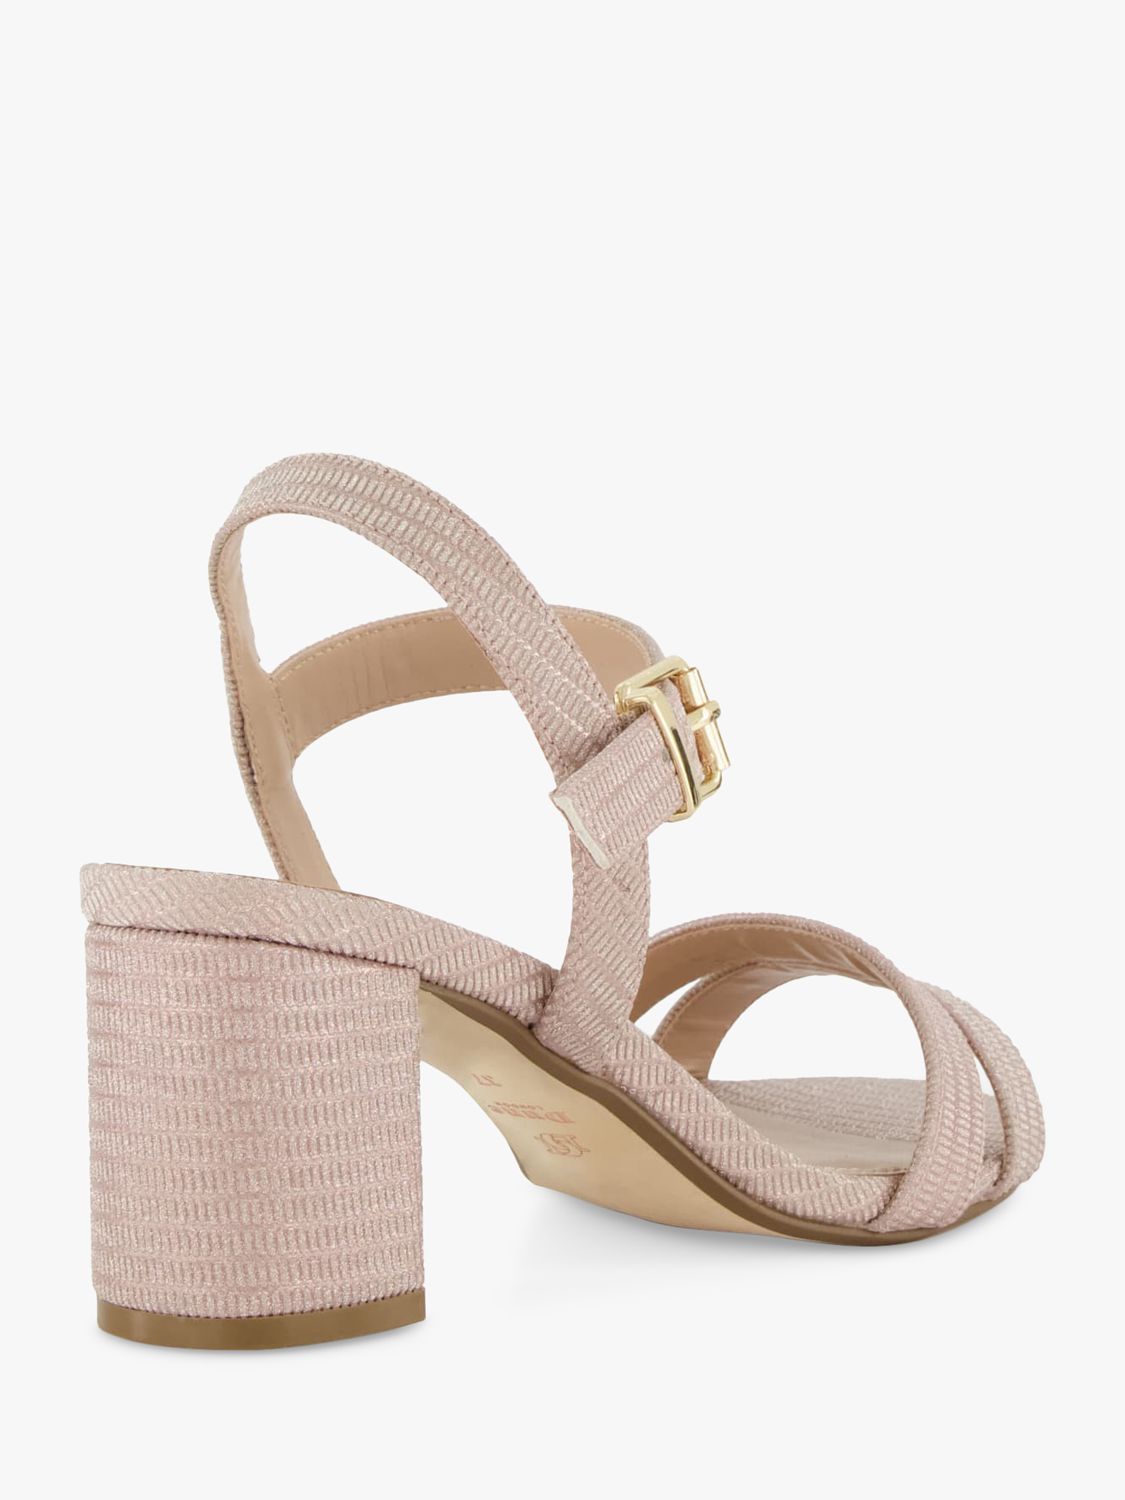 Gold Wide Fit Block Heeled Sandals